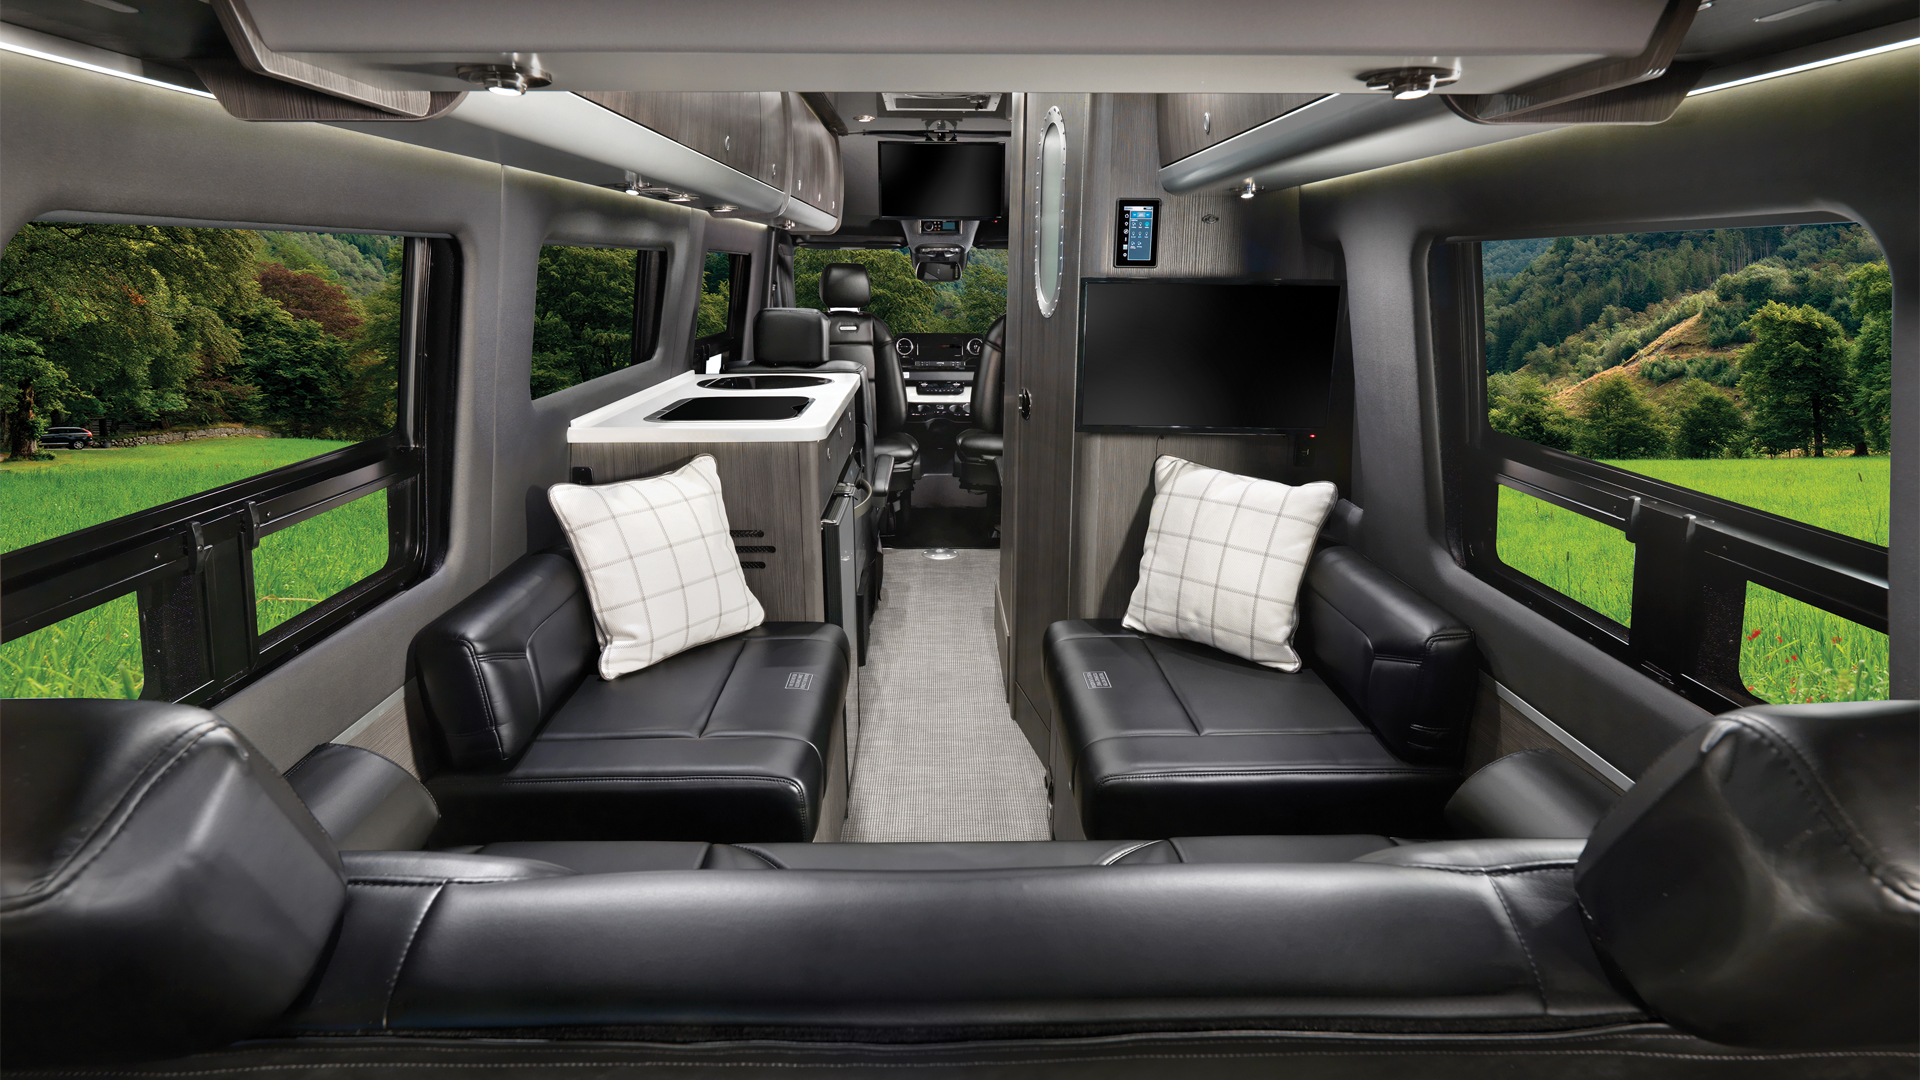 Airstream Interstate 24GL Touring Coach with the formal black interior and looking from the back to the front of the Class B motorhome